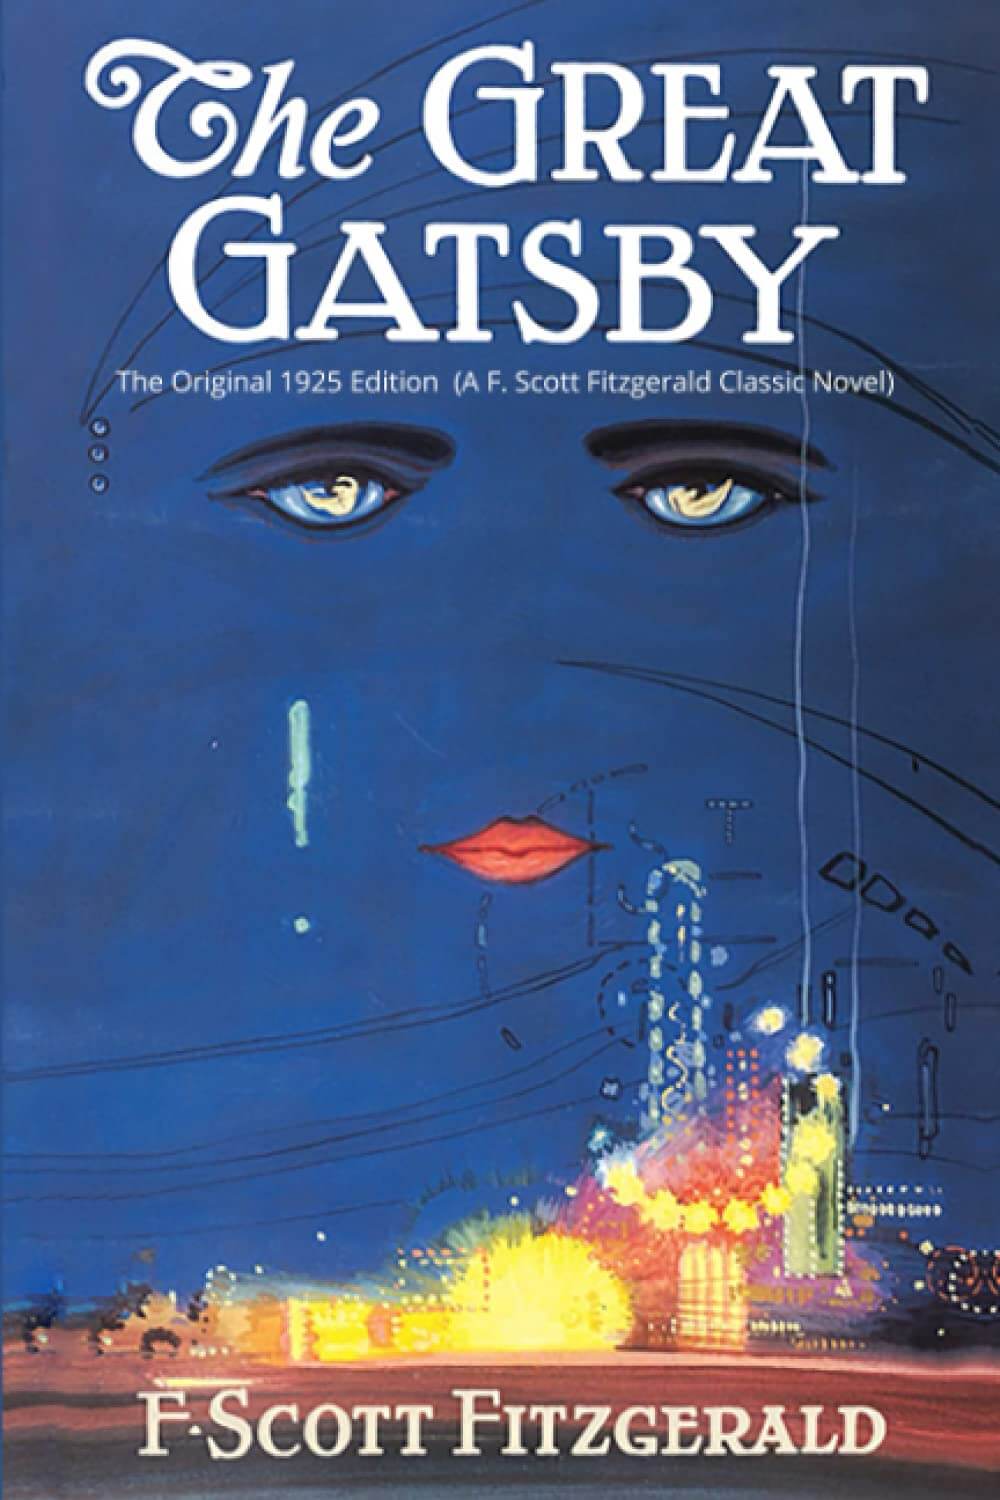 "The Great Gatsby" (1925)